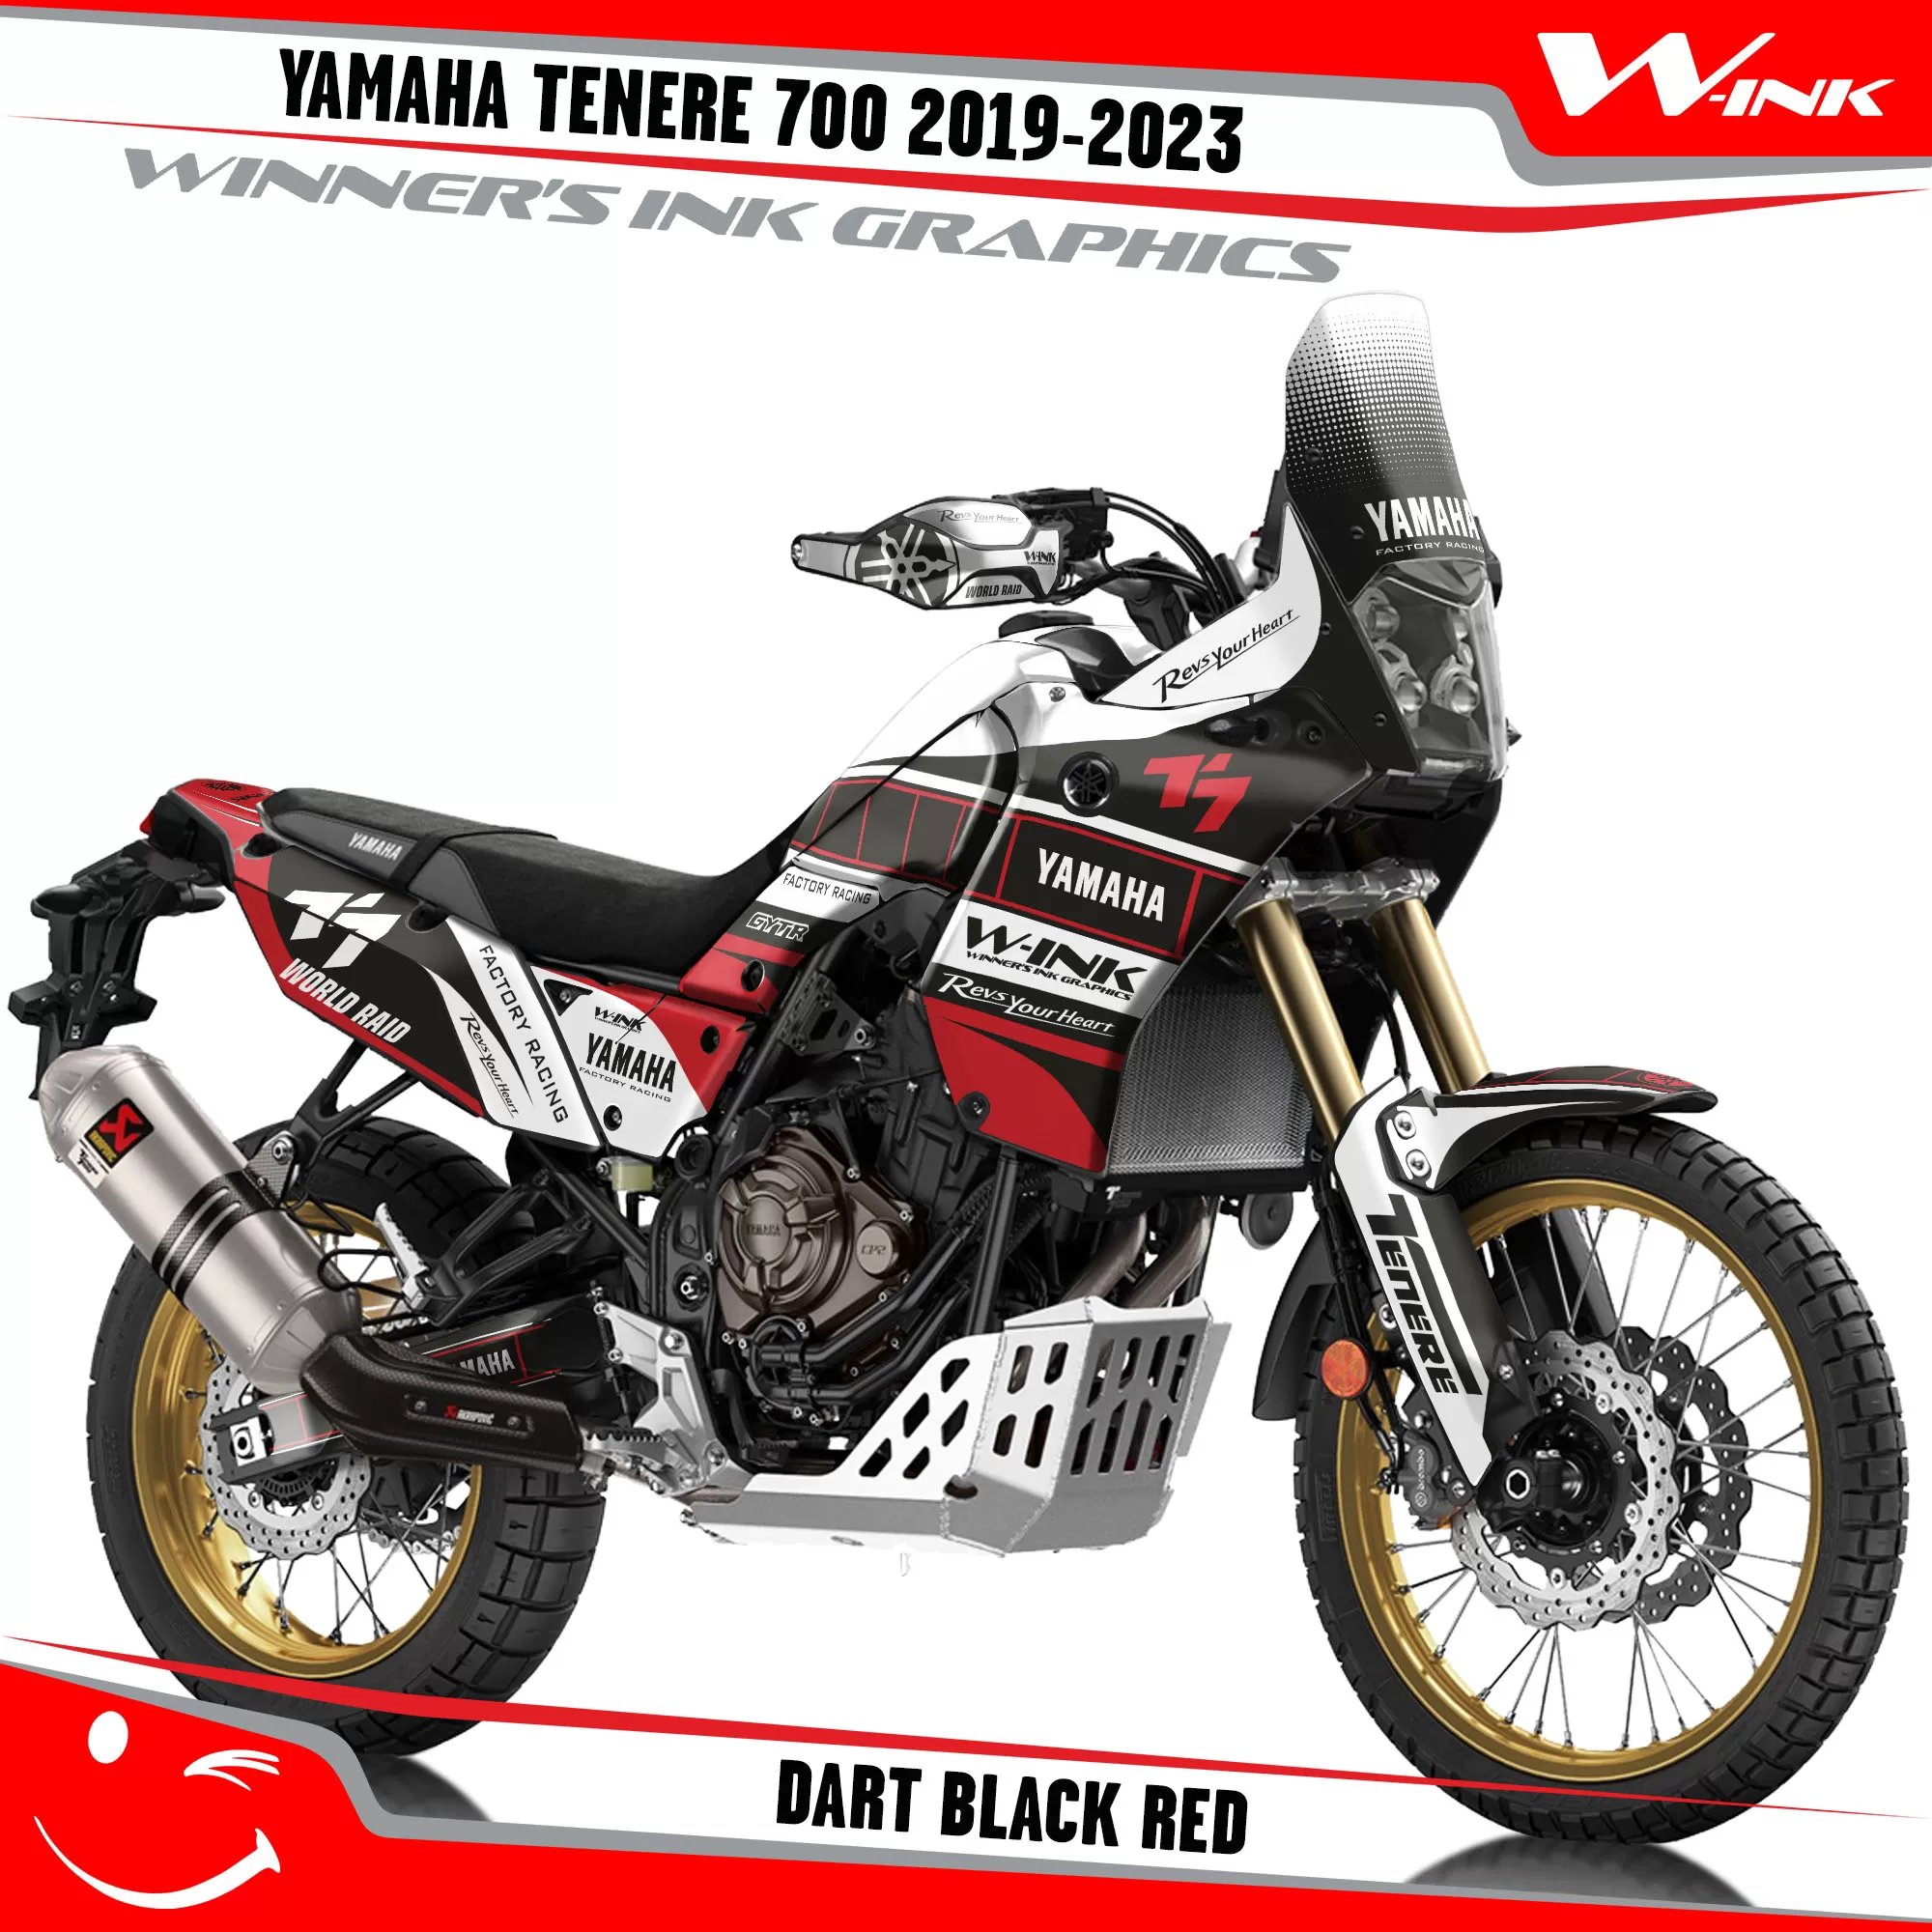 Yamaha-Tenere-700-2019-2020-2021-2022-2023-graphics-kit-and-decals-with-desing-Dart-Black-Red